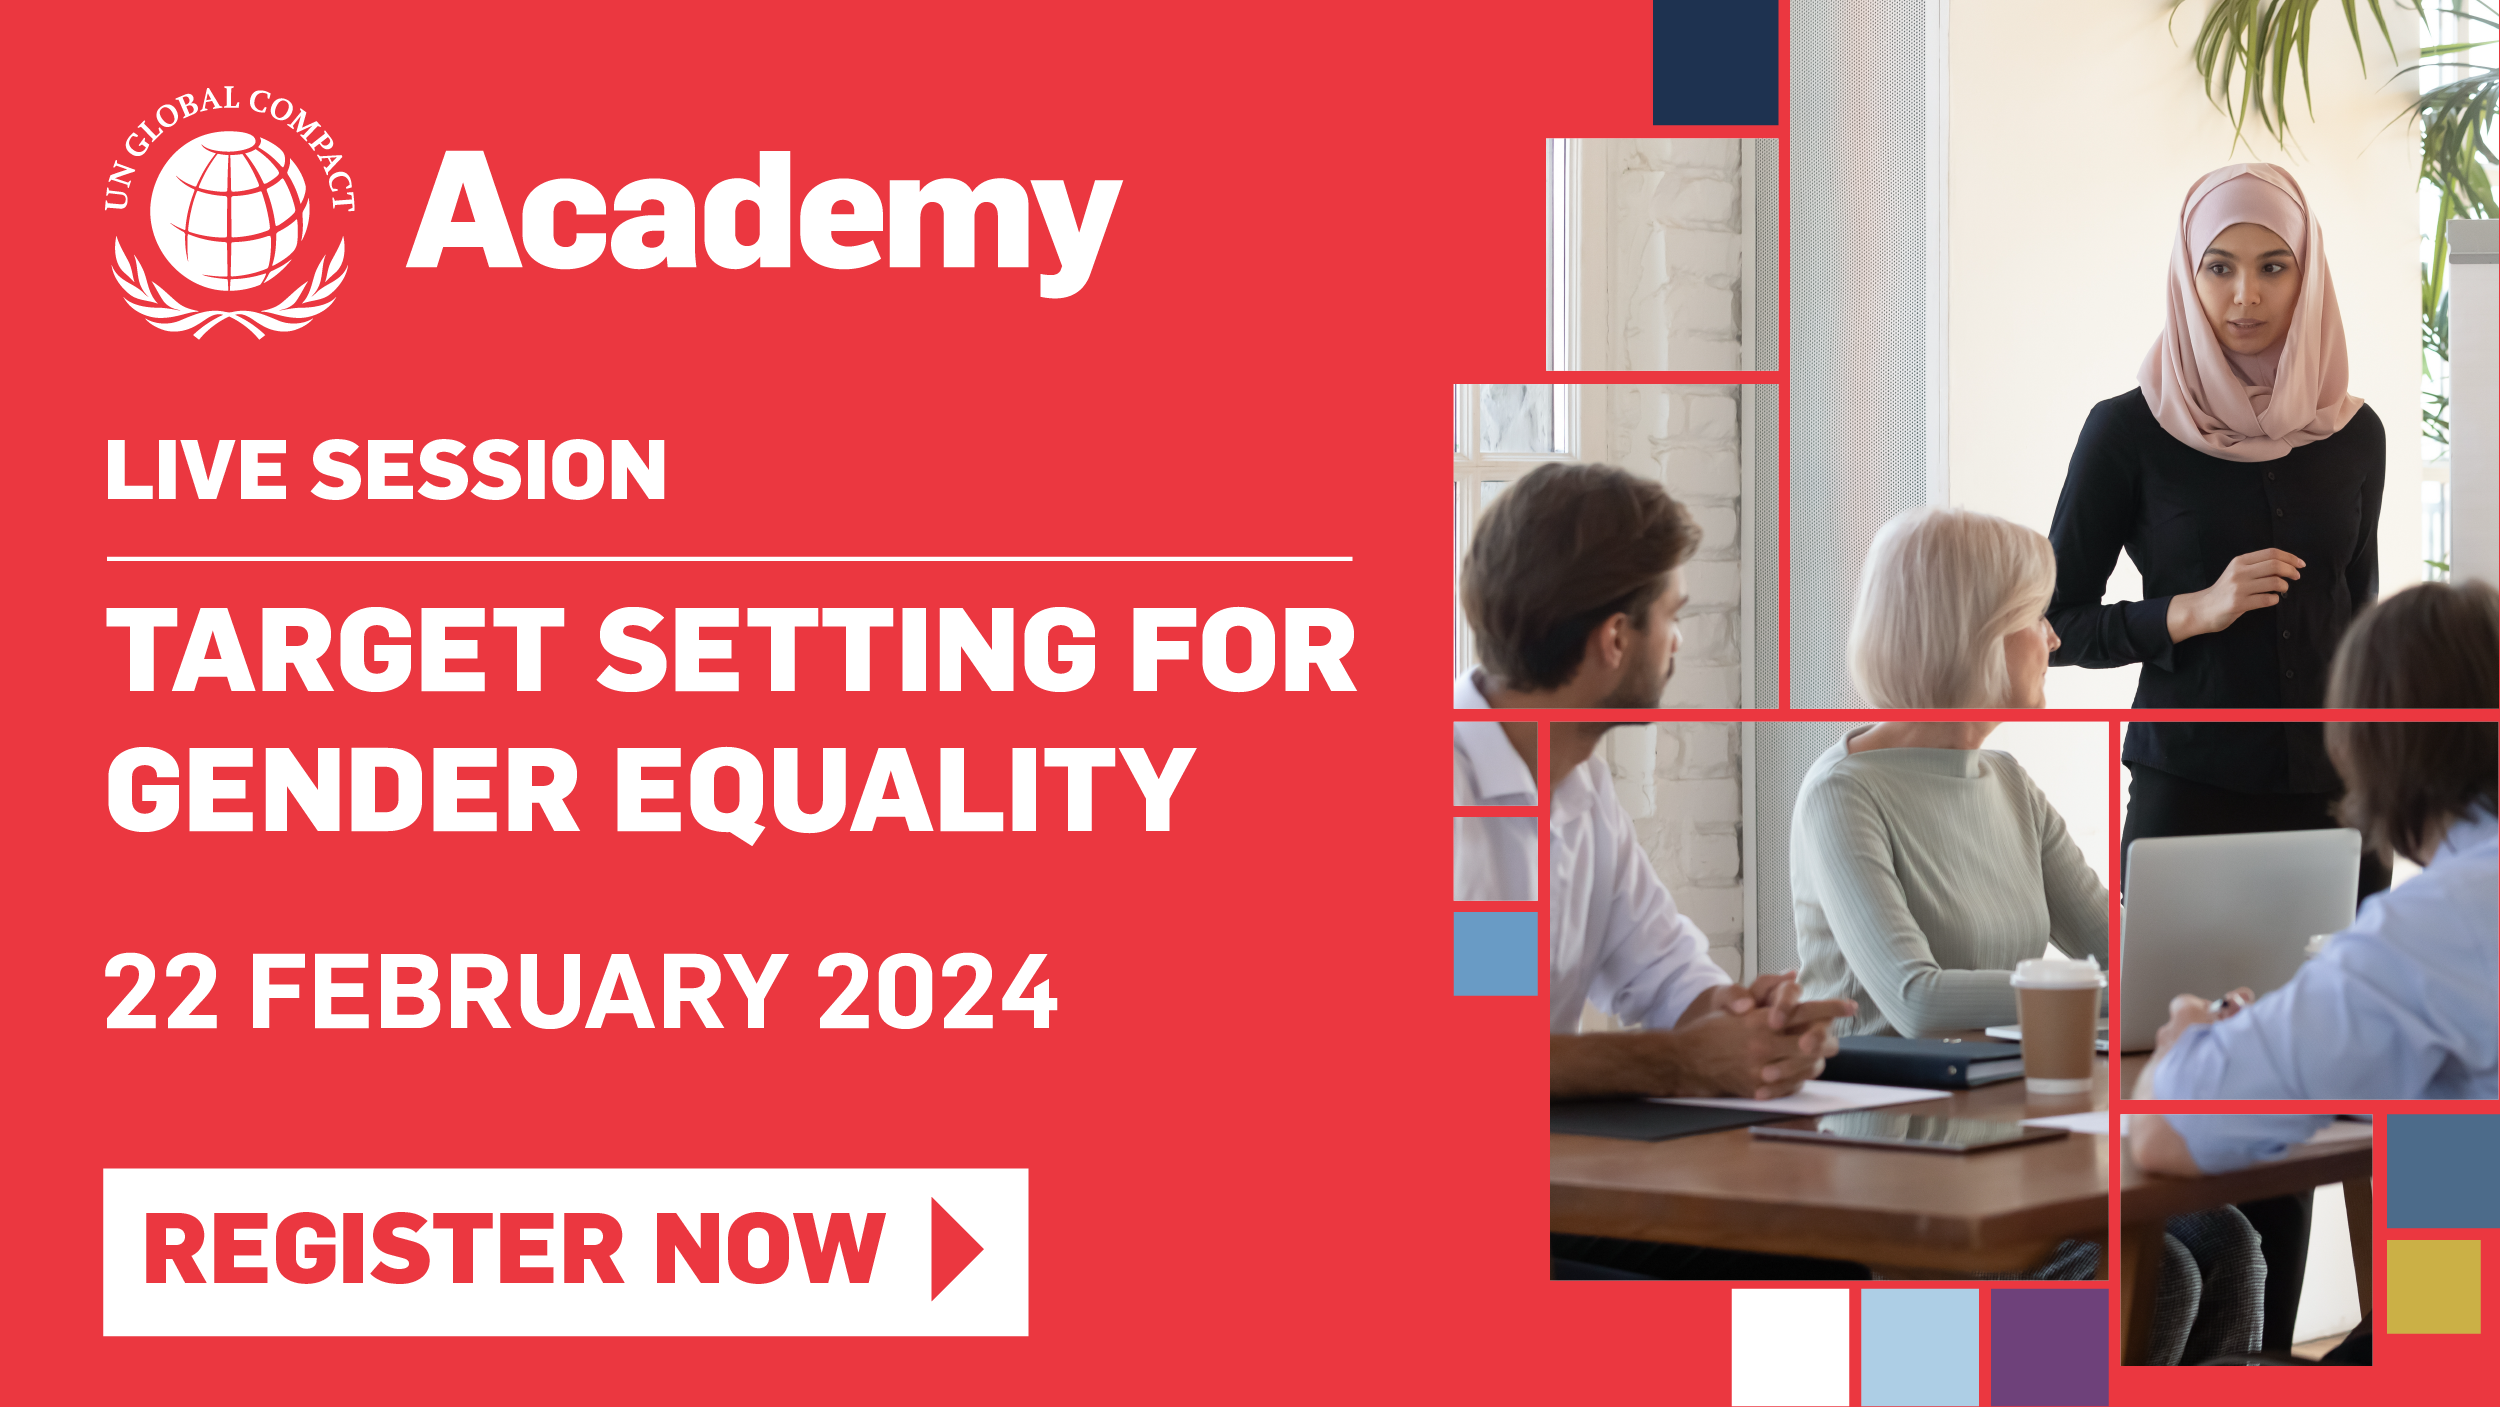 Join this session to learn how companies can set clear and ambitious targets for gender equality.